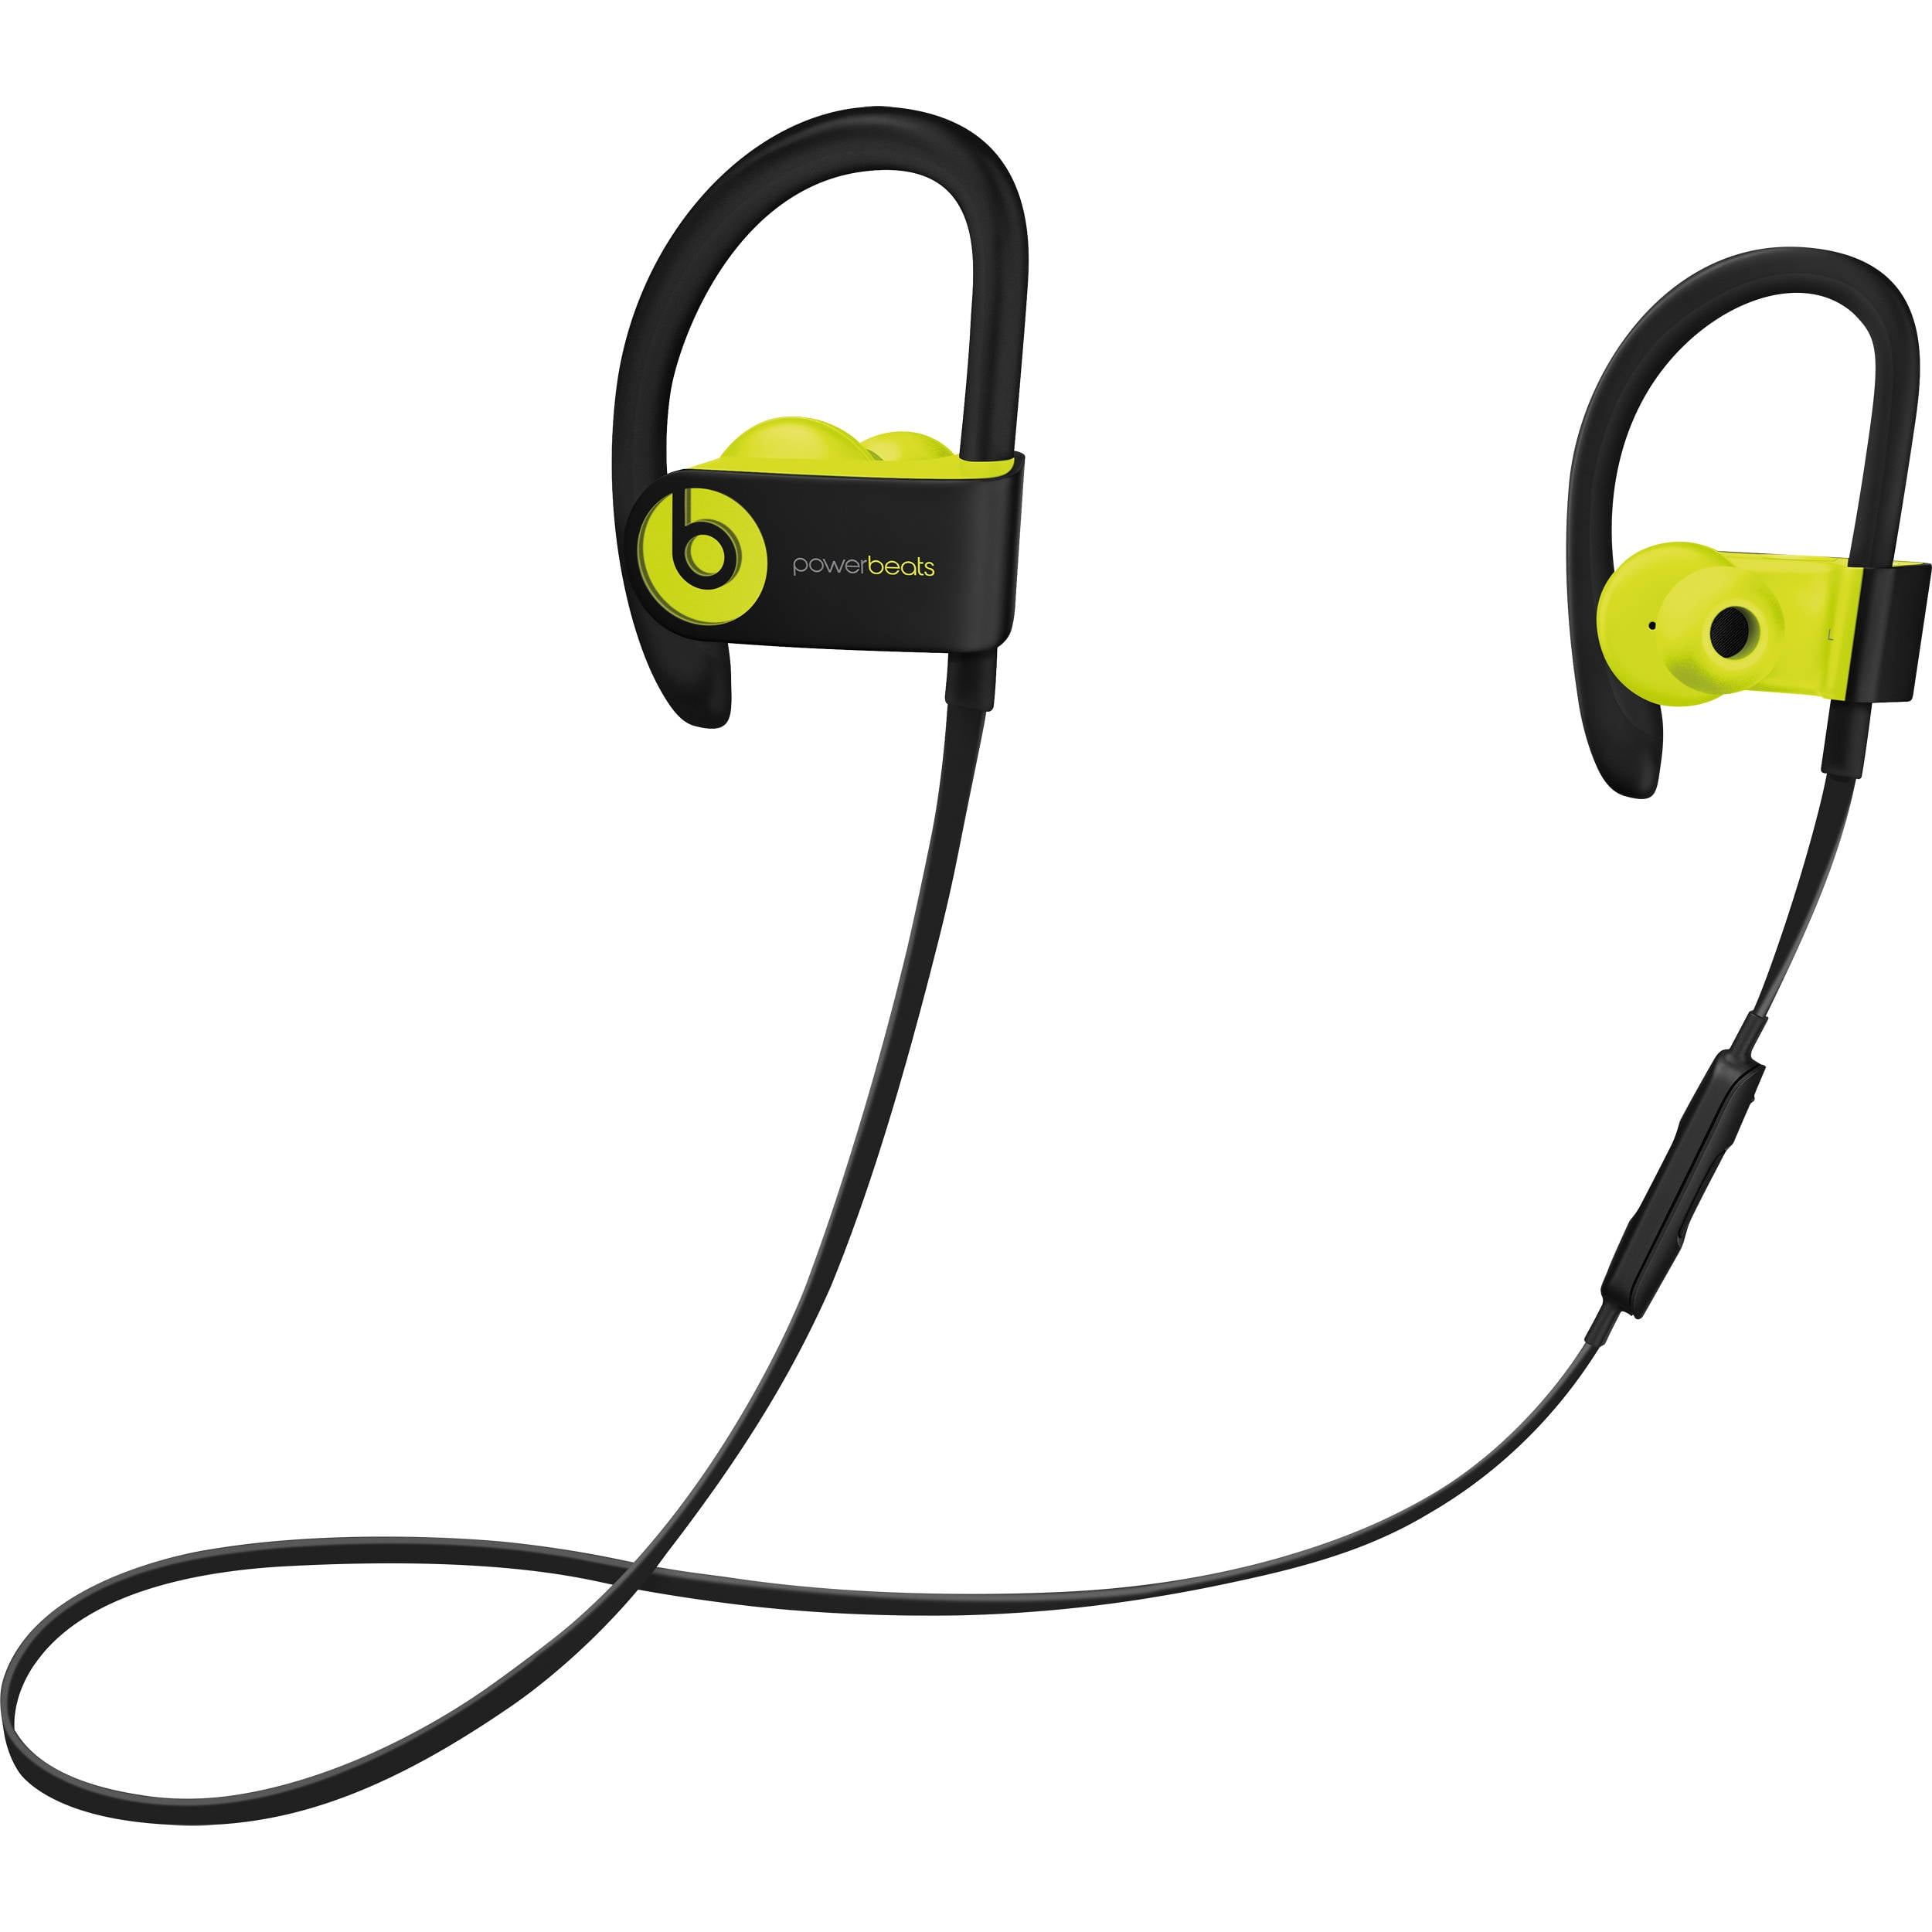 Brand by Yellow by in Dr. Beats Shop Dre Headphones | Headphones